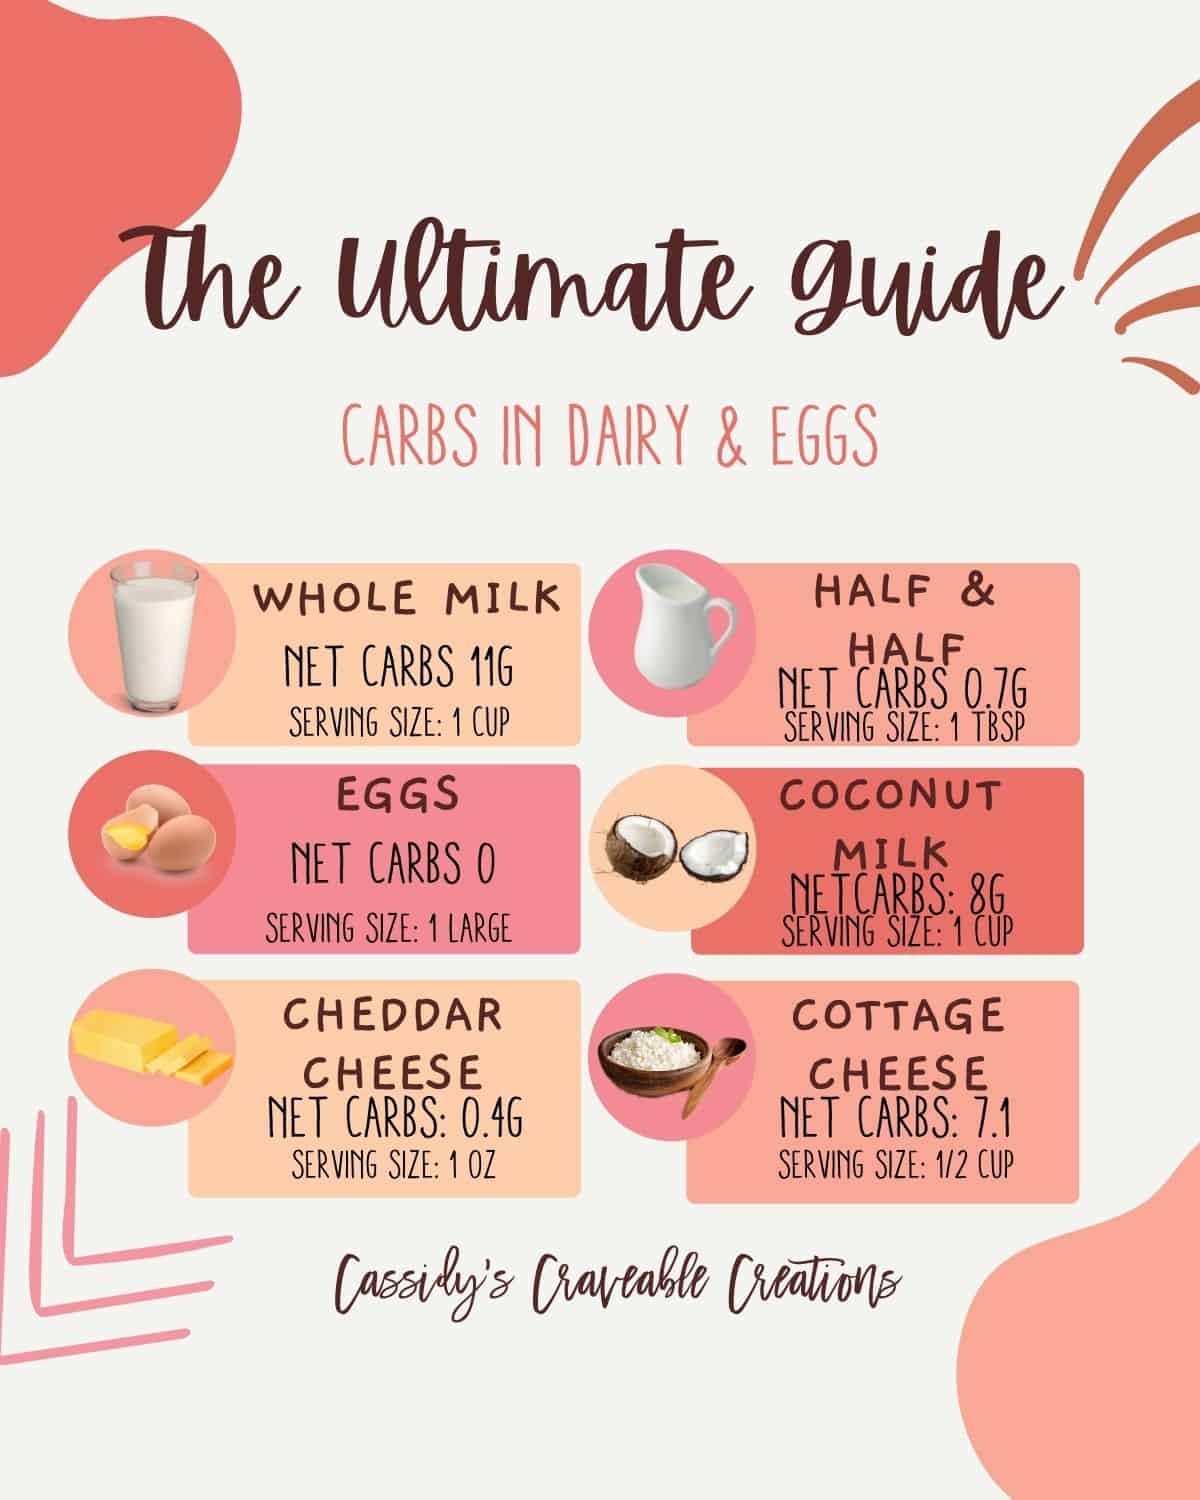 graphic of carbs in dairy & eggs